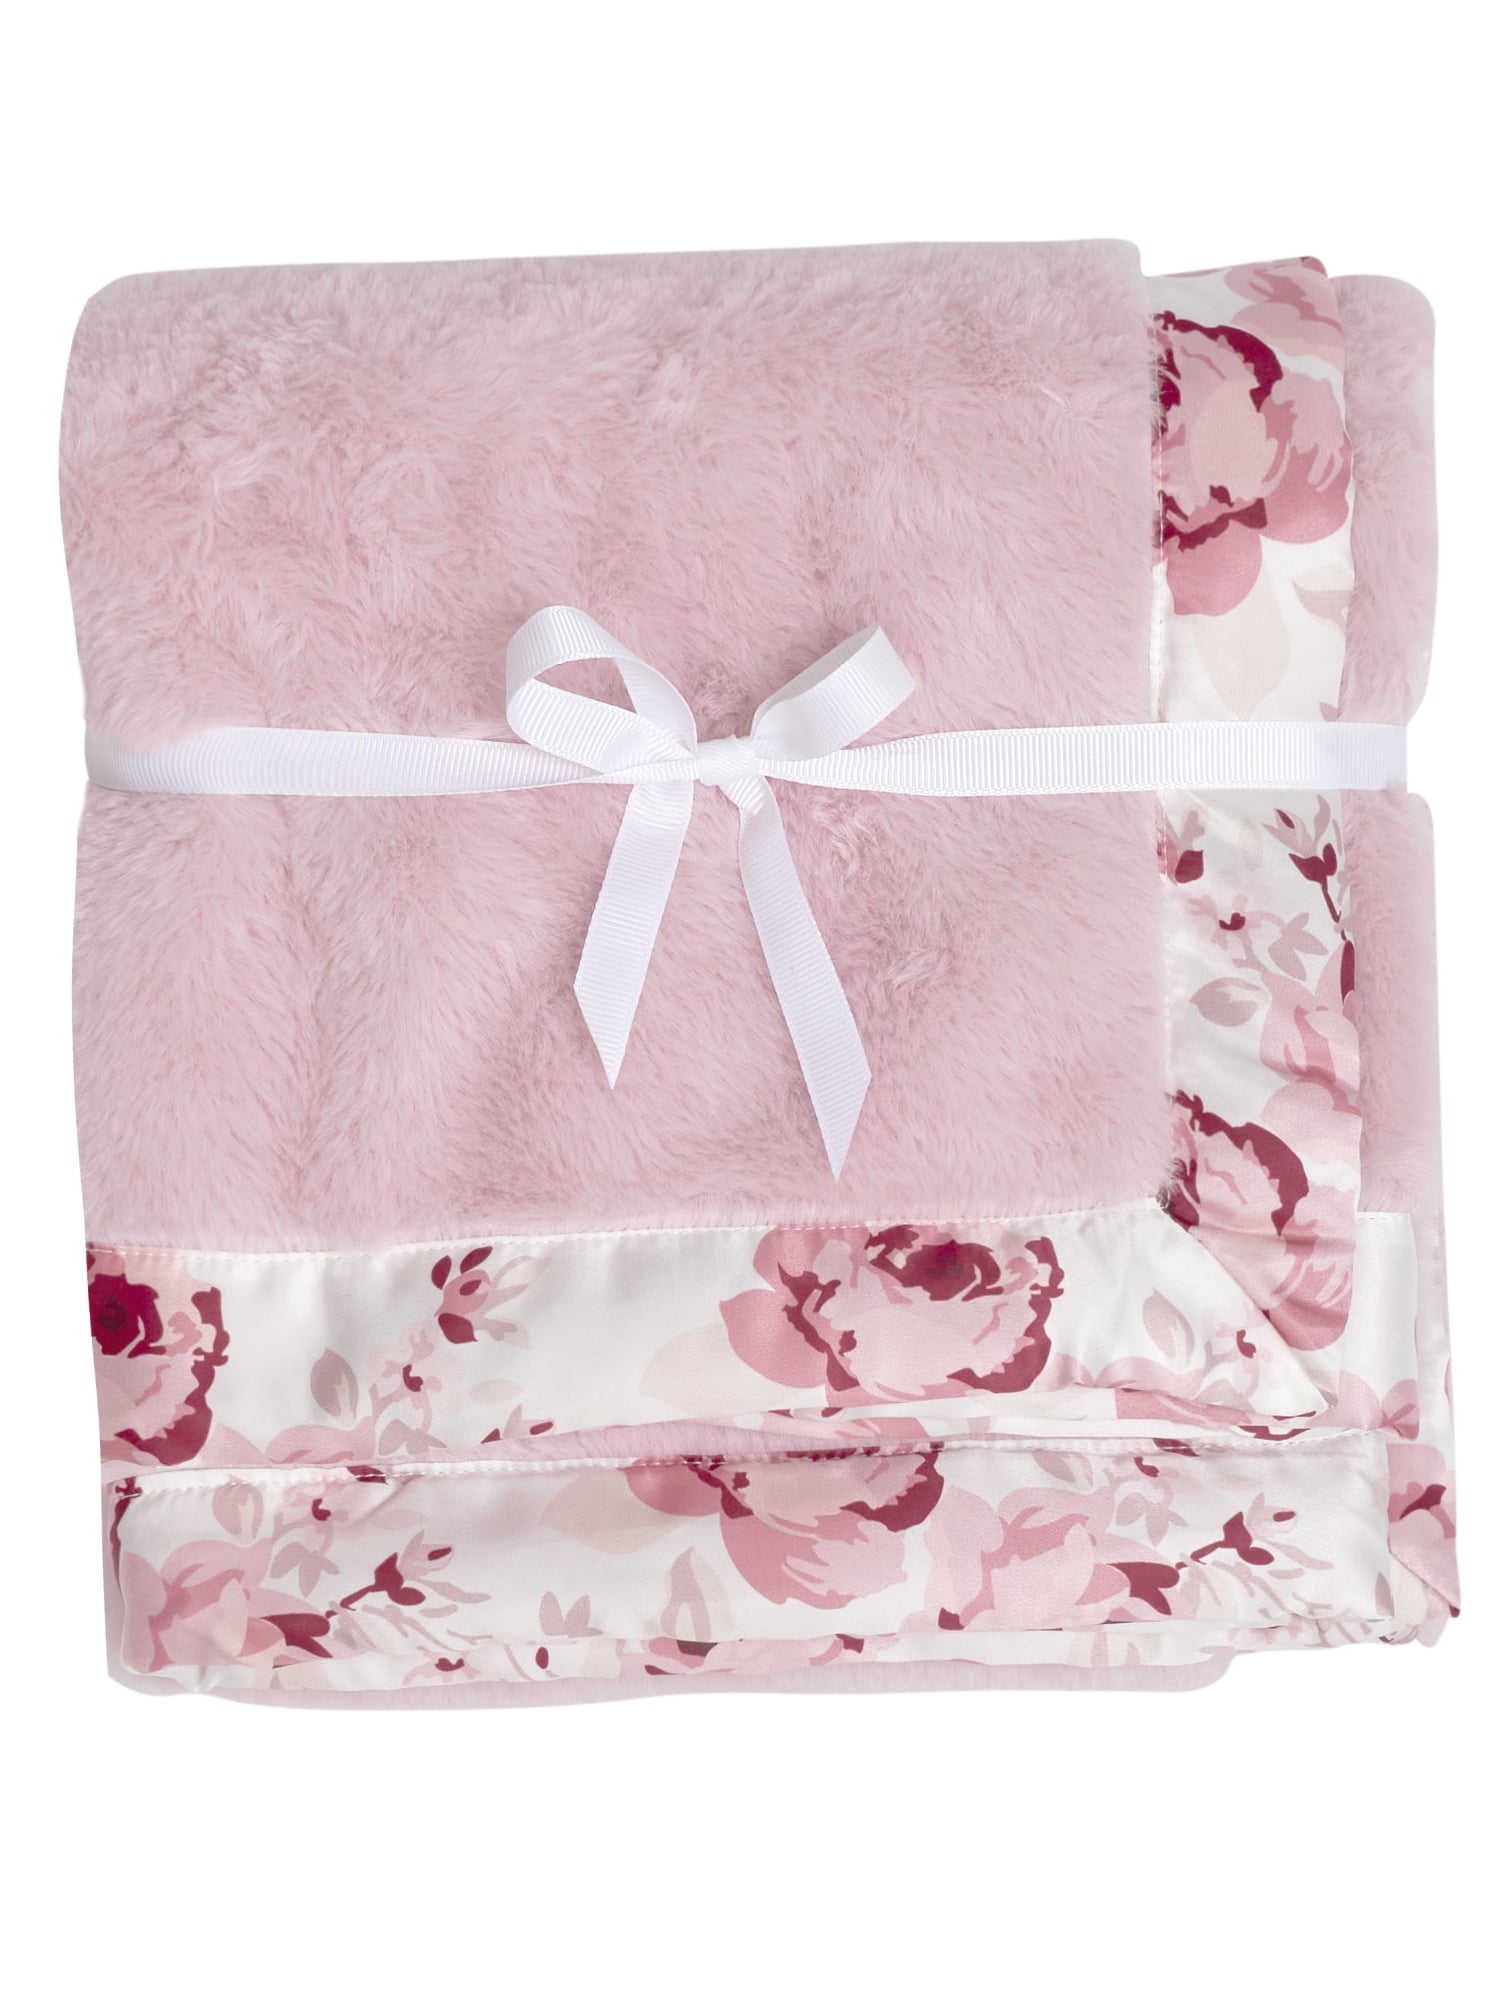 Modern Moments by Gerber Baby & Toddler Girl Plush Blanket with Satin Trim, Pink Roses